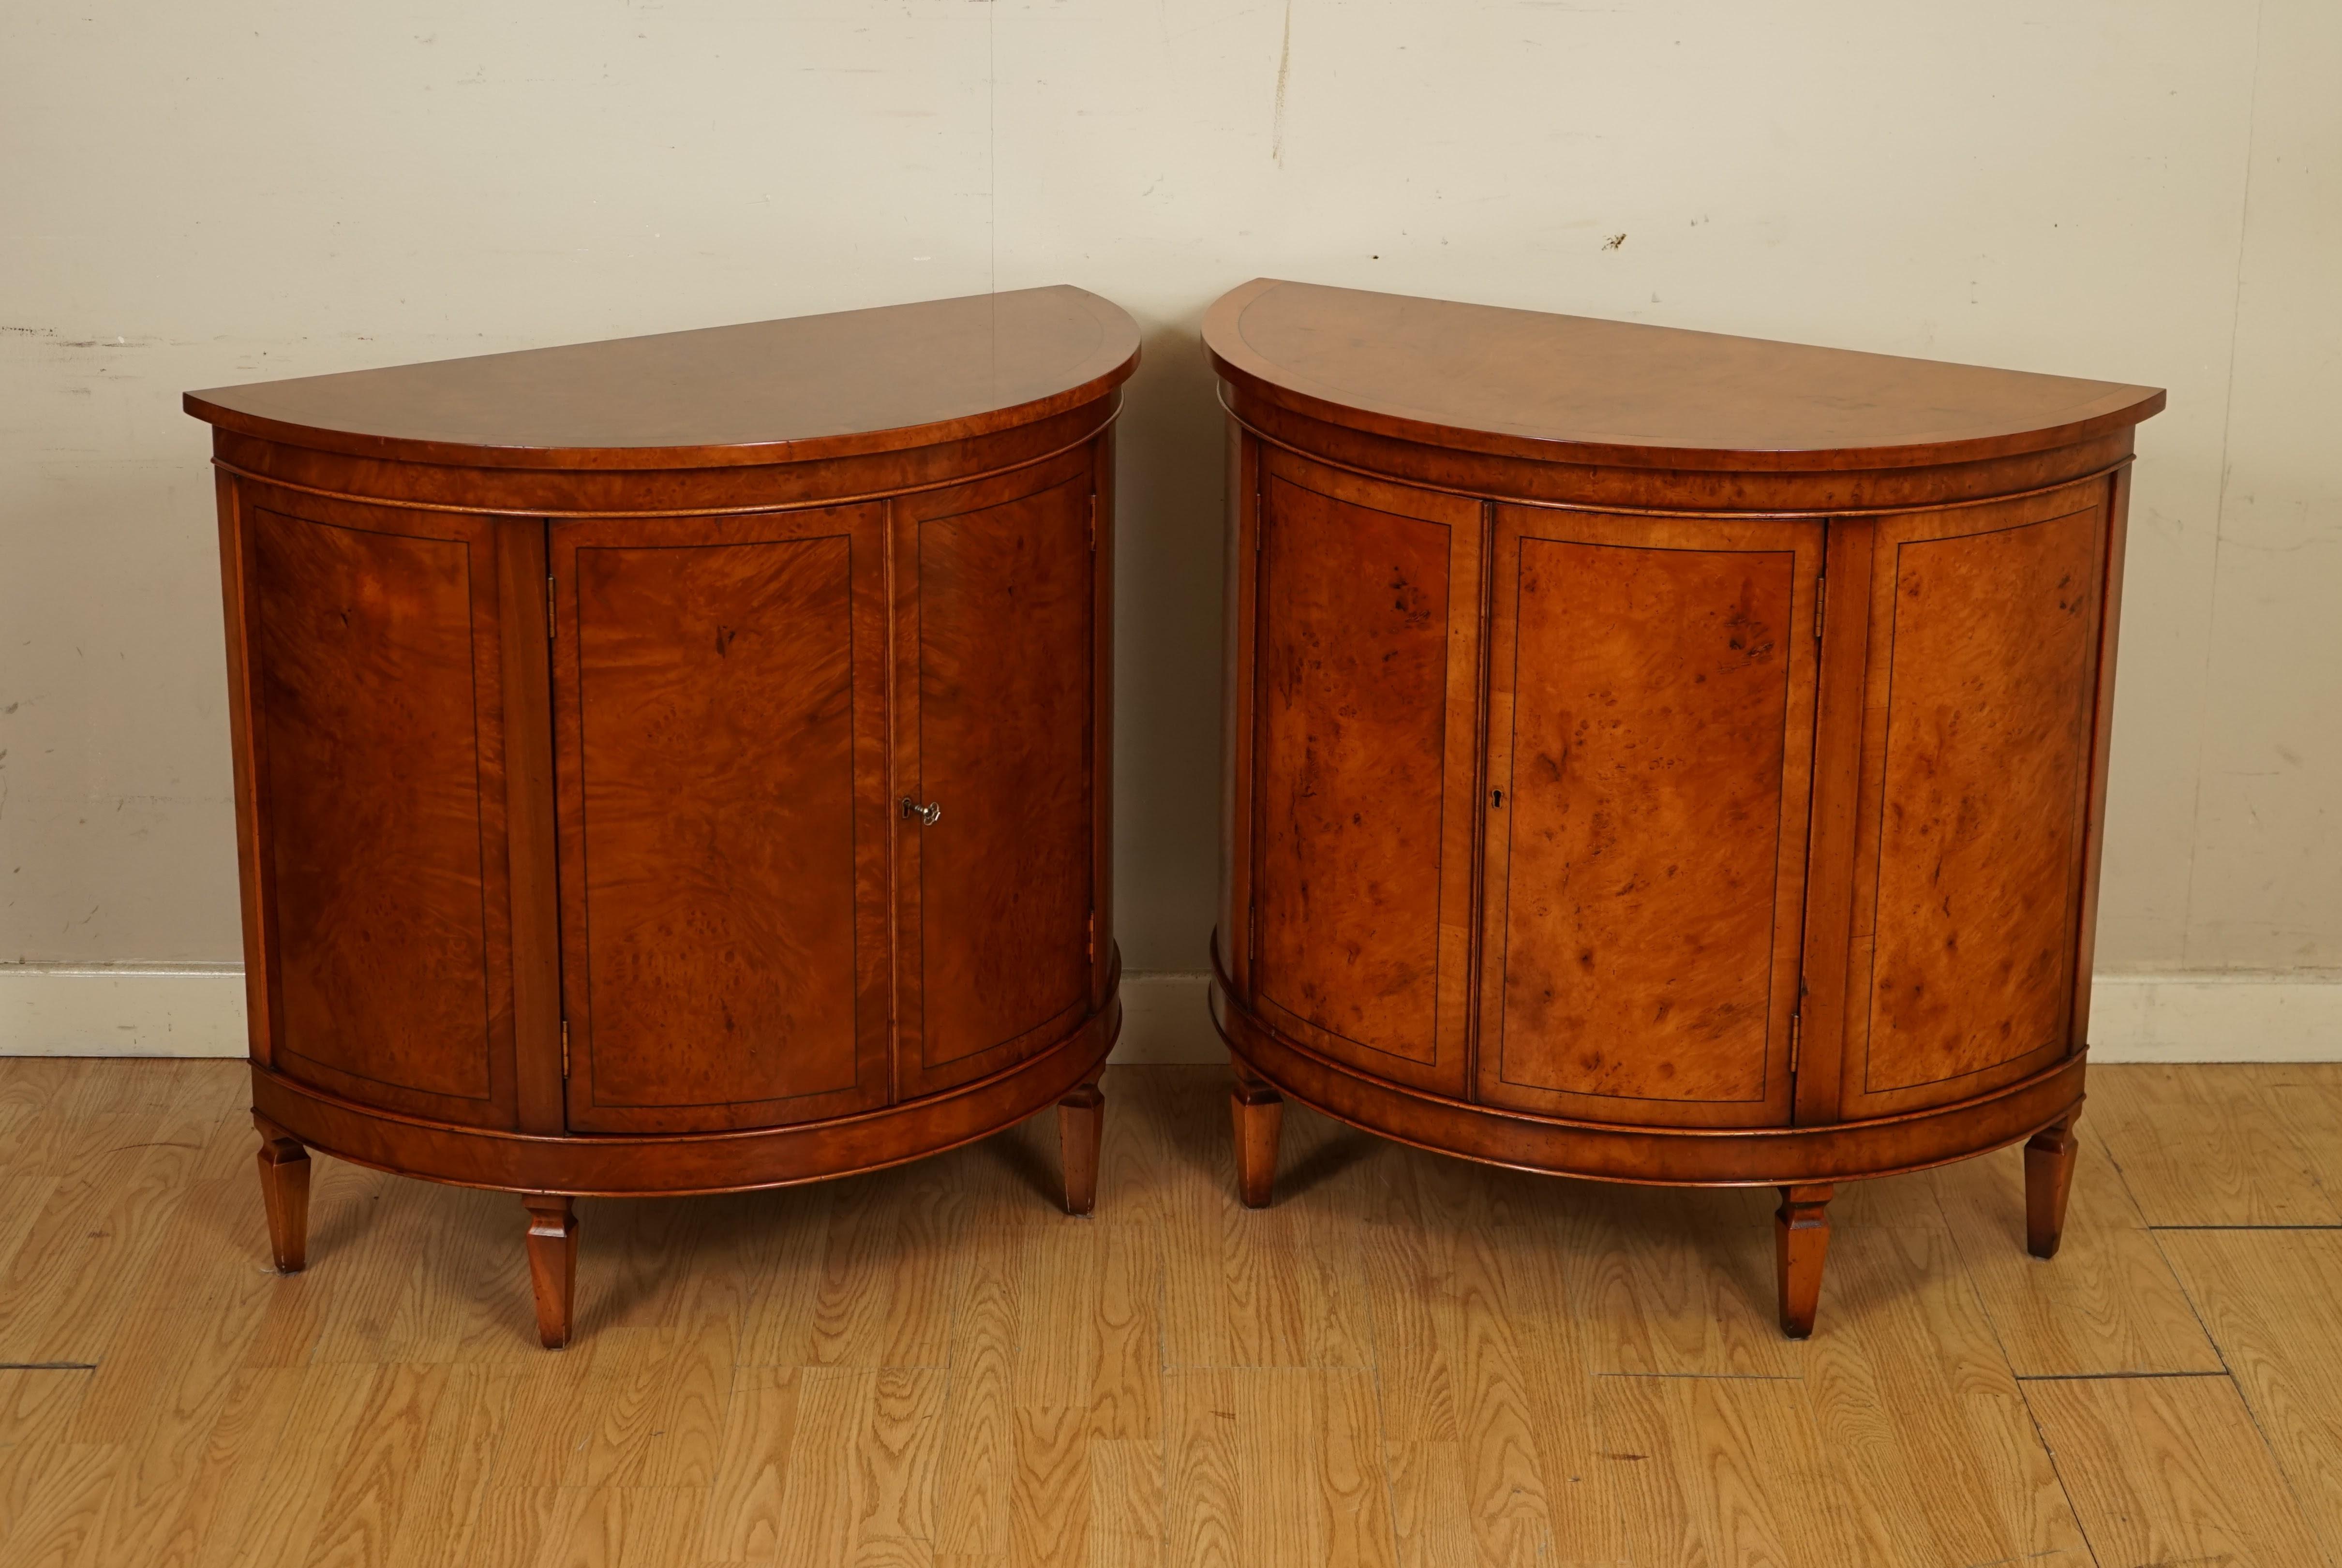 British Very Stunning Matched Pair of Demi Lune Burr Walnut Sideboard Cabinet End Table